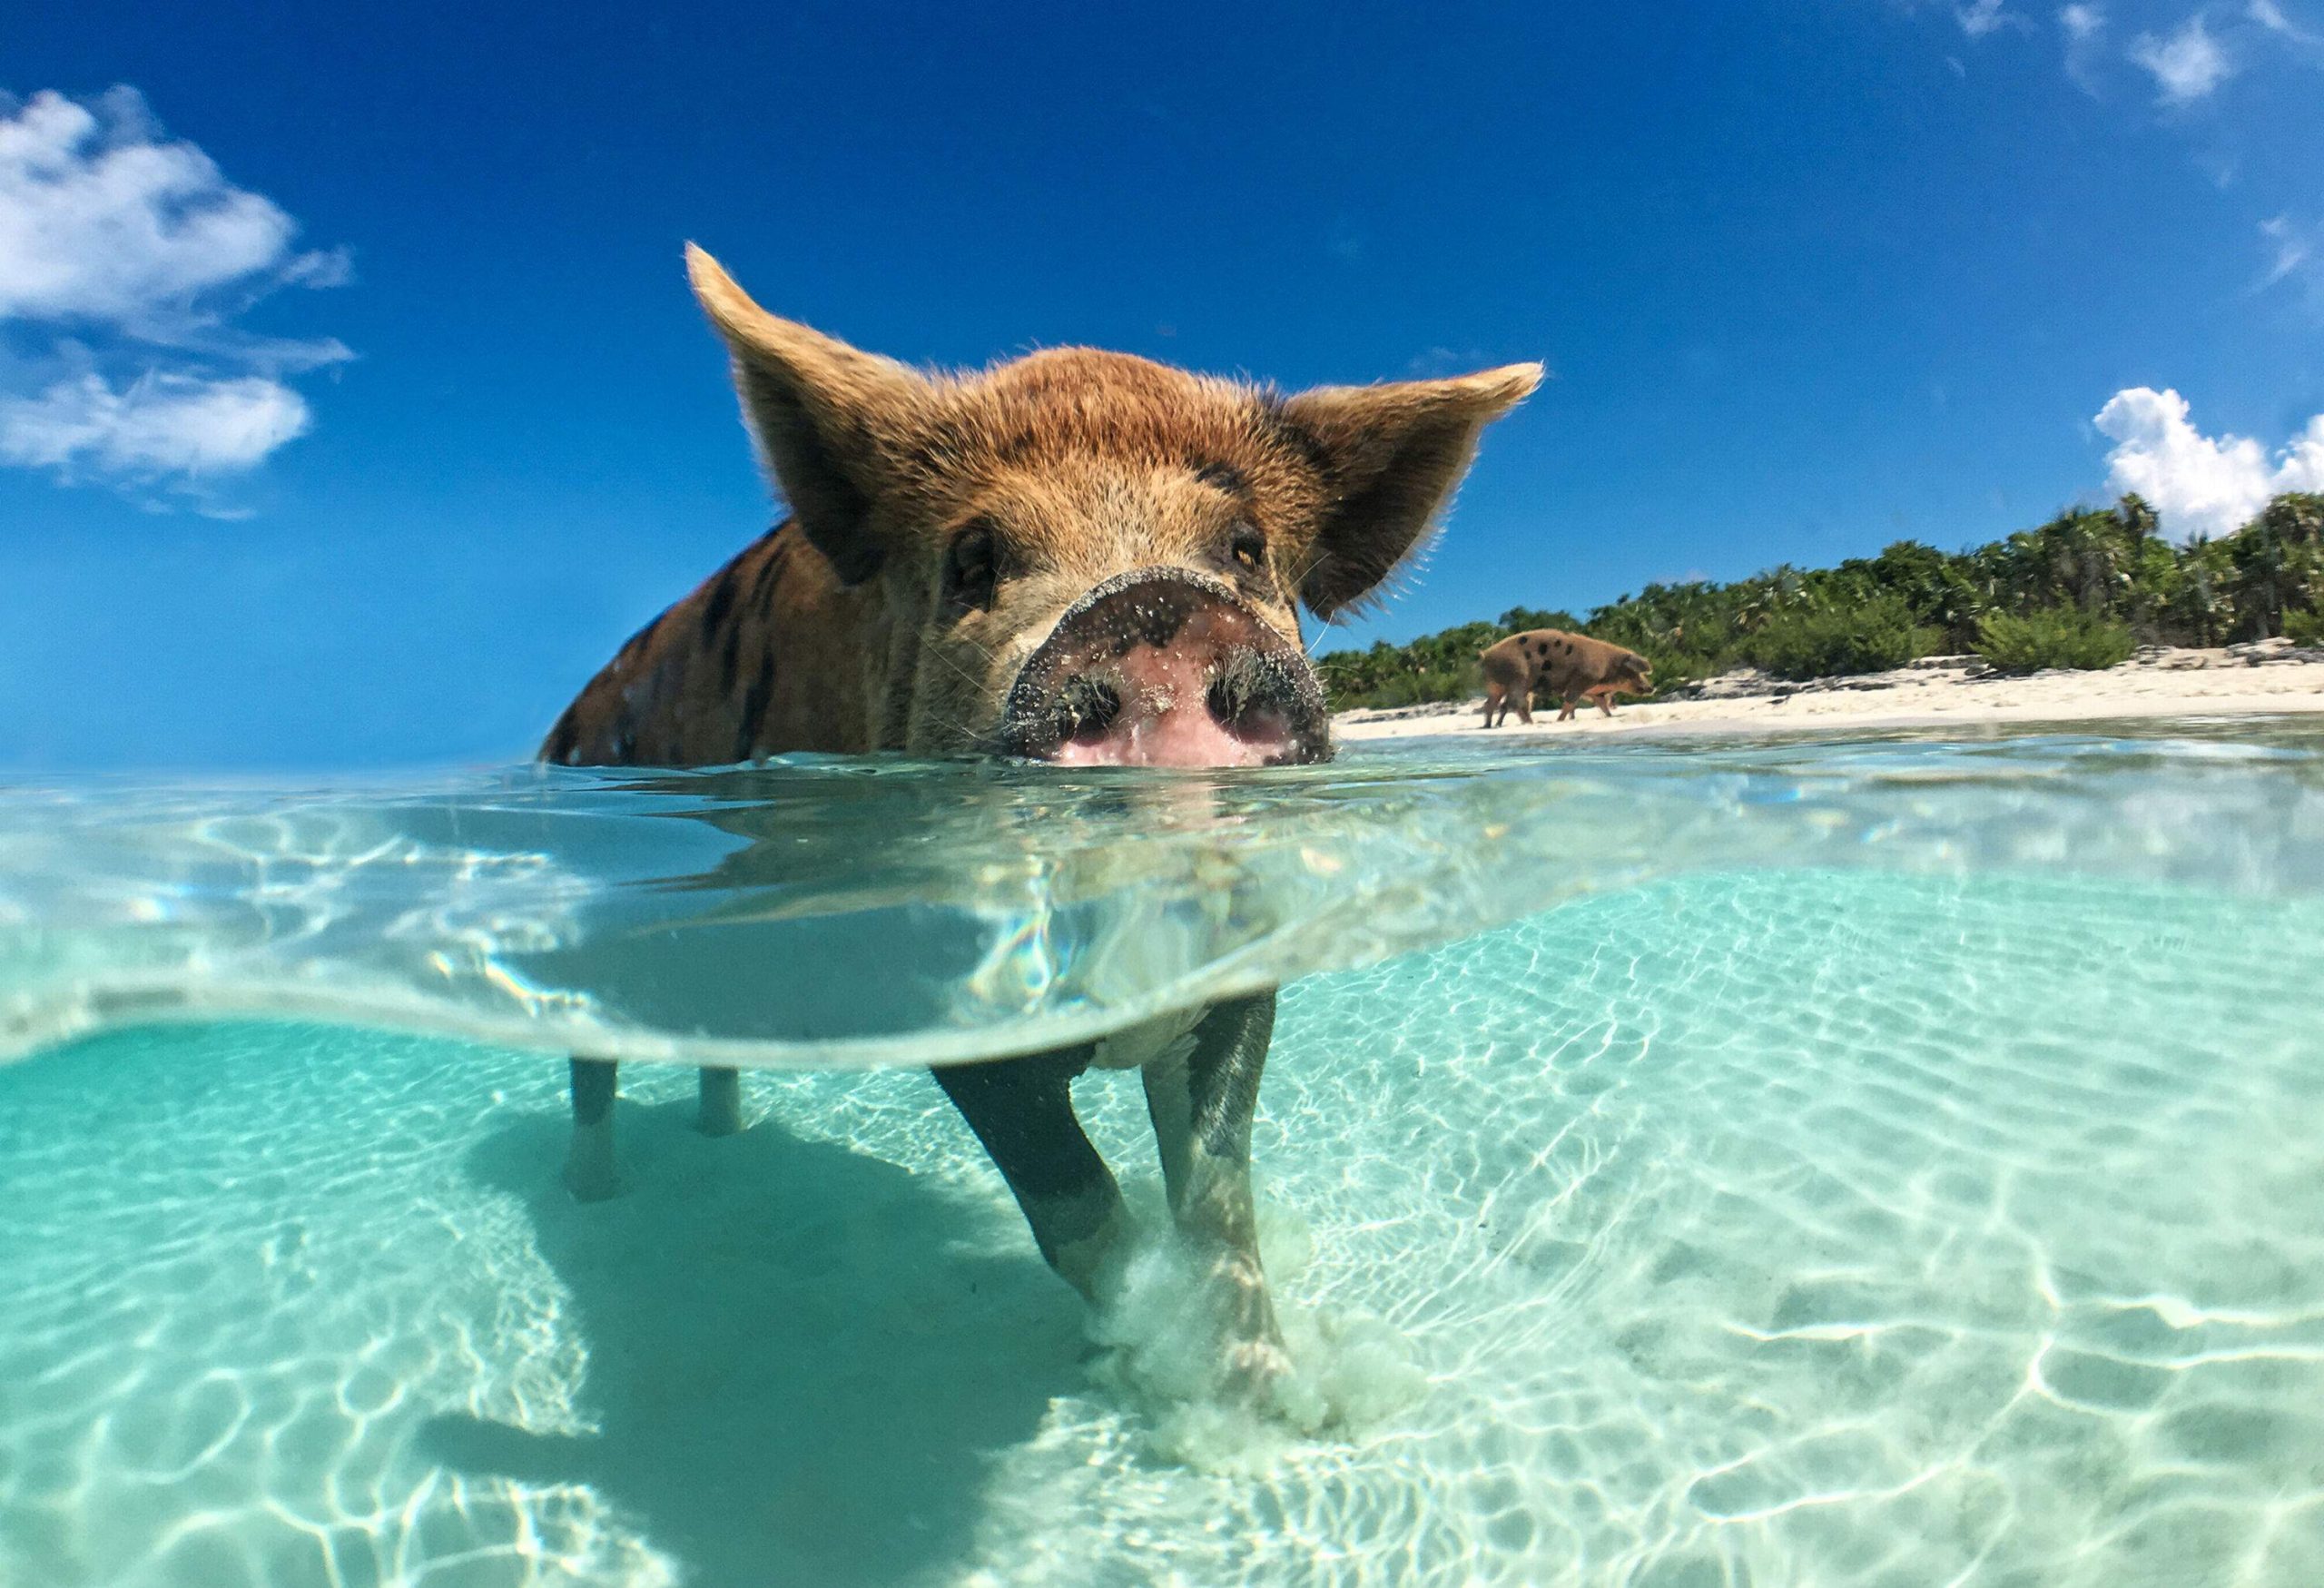 A close-up of a cute pig submerged in the clear sea near the white sand shore lined by tall green trees.